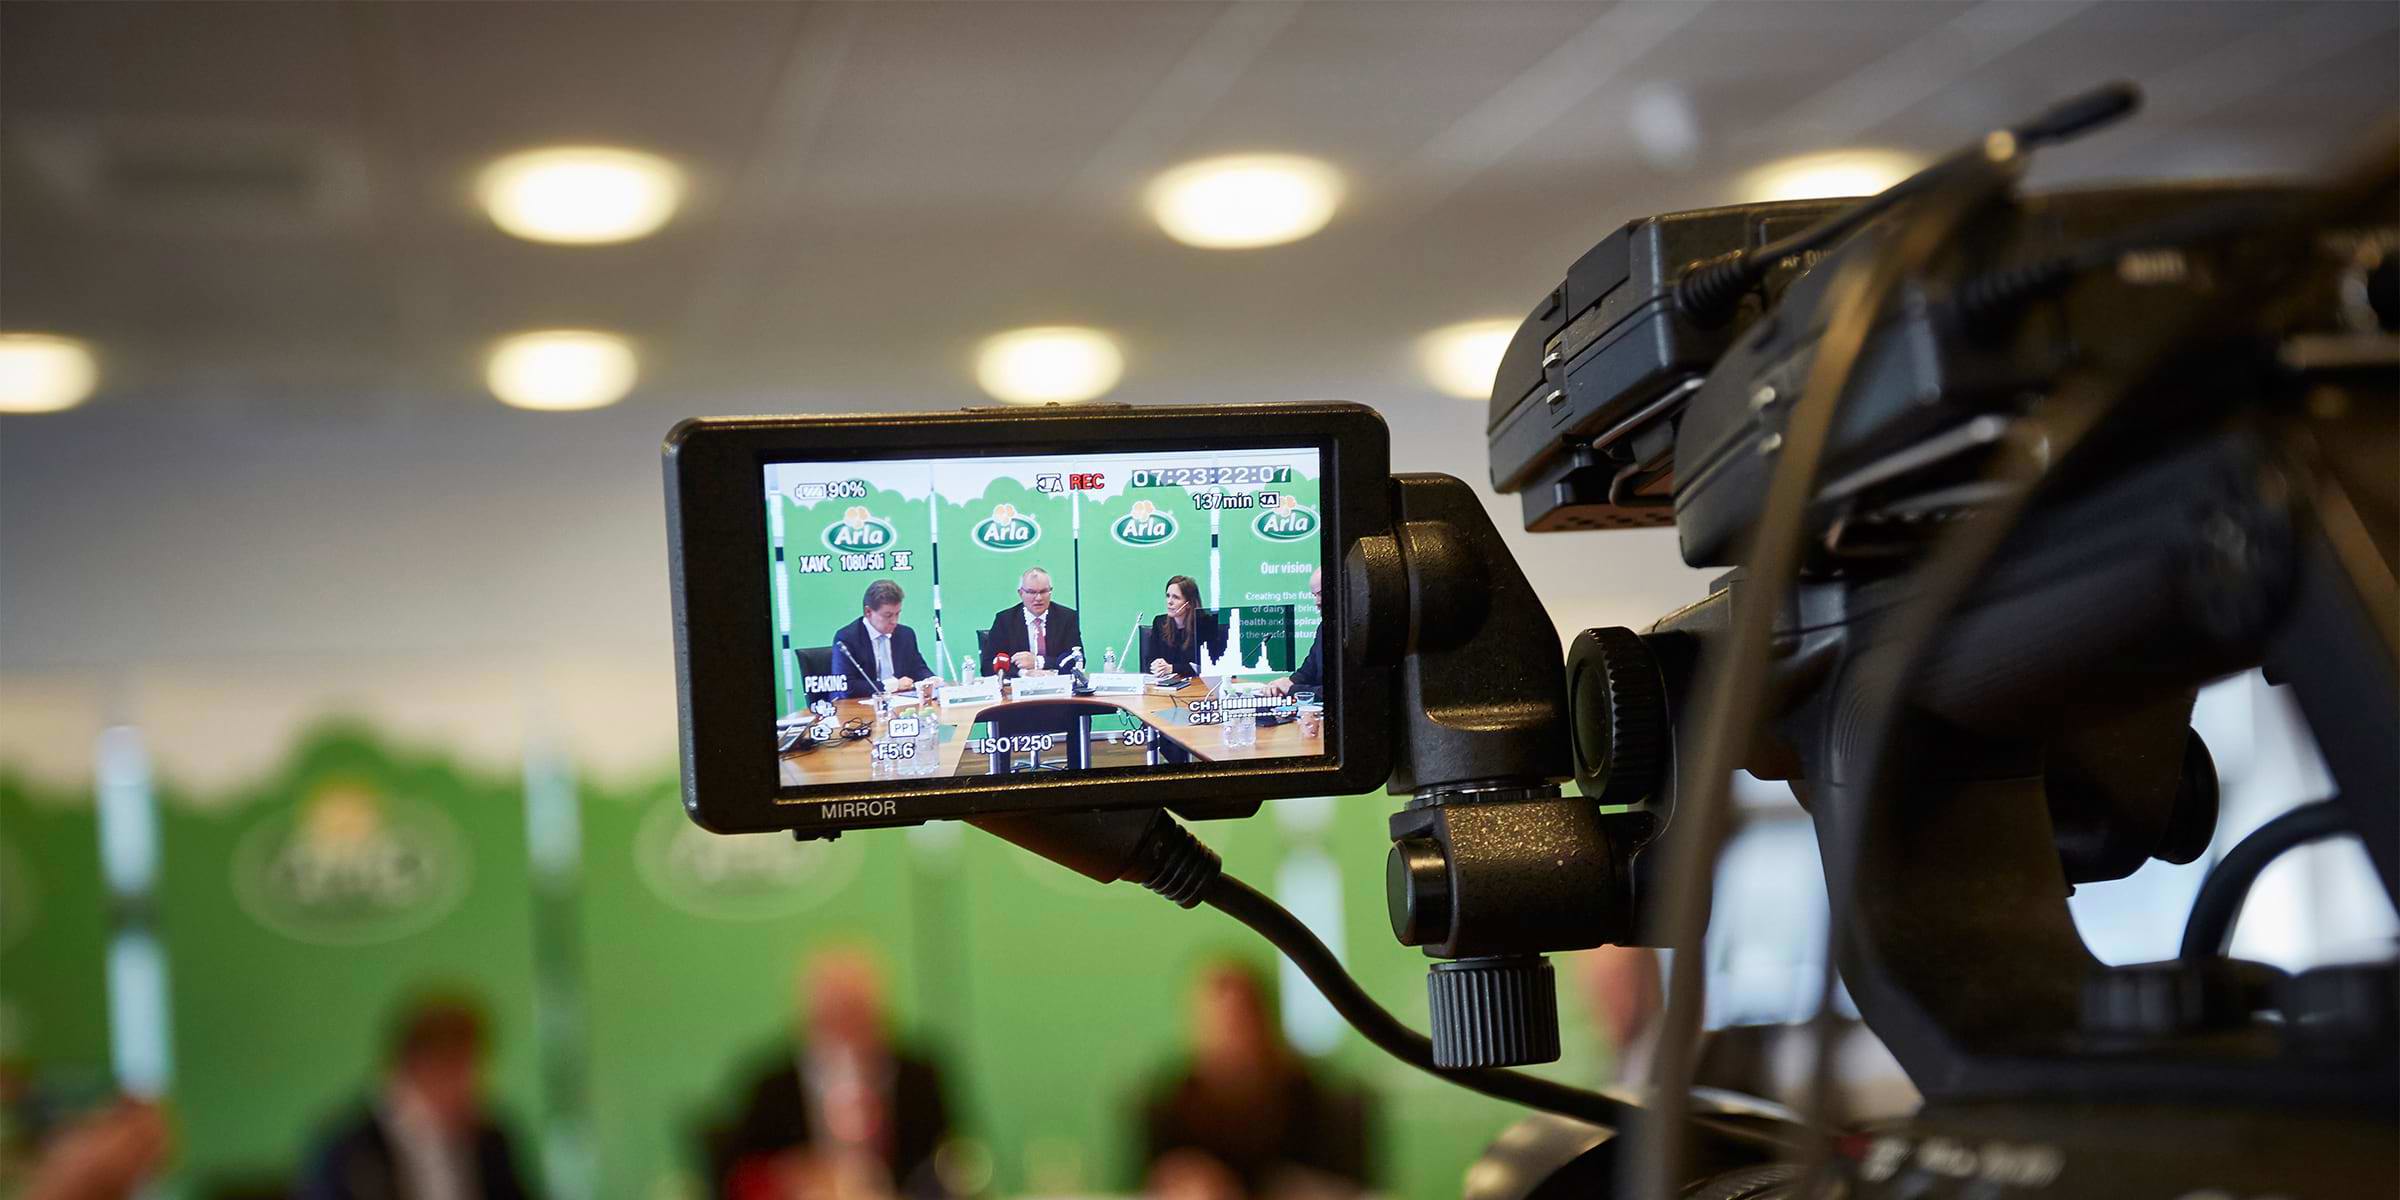 An Arla press meeting seen through the viewfinder of a camcorder